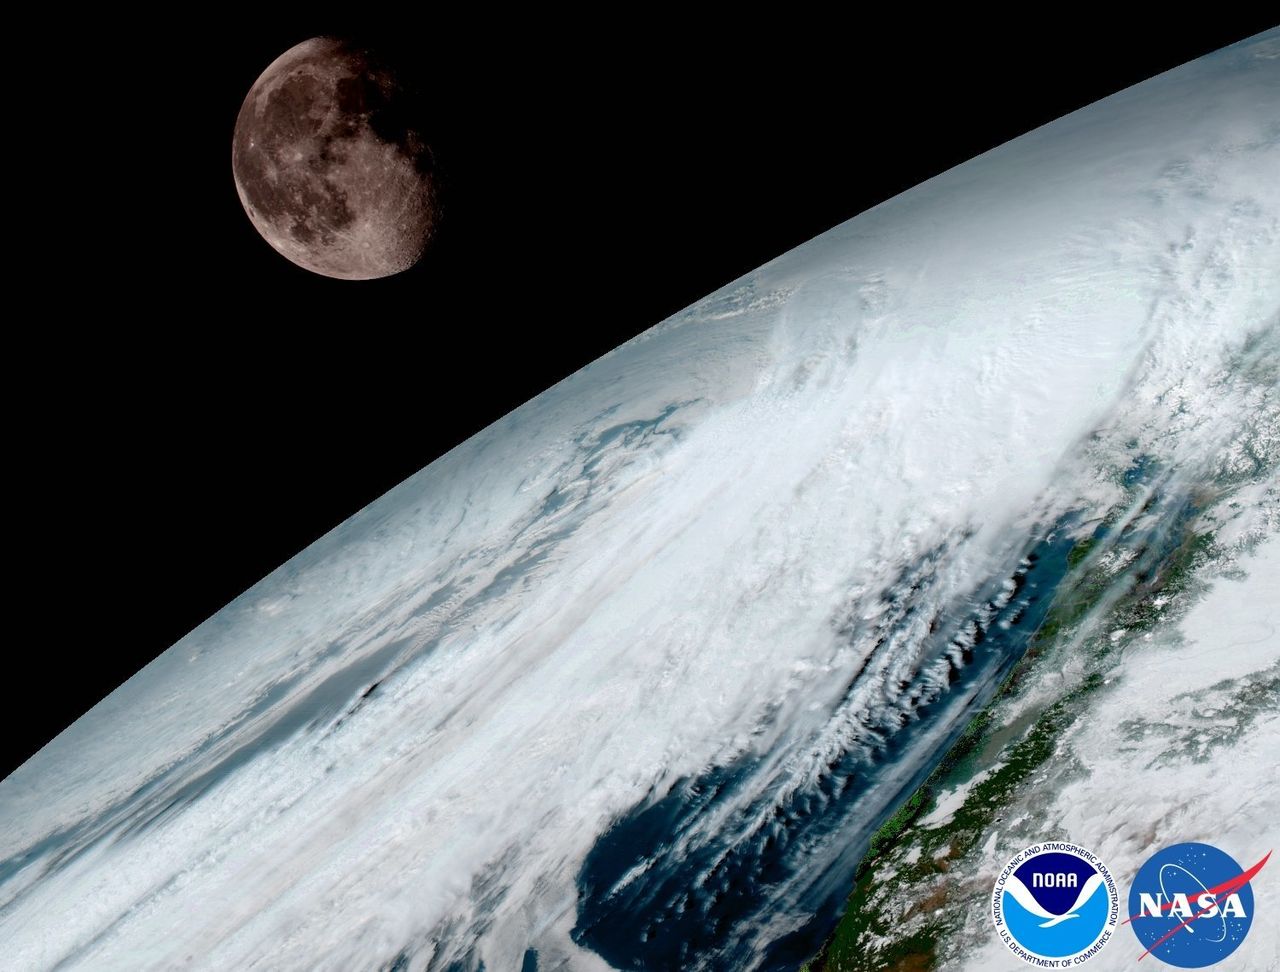 GOES-16 captured this view of the moon as it looked across the surface of the Earth. Like earlier GOES satellites, GOES-16 will use the moon for calibration.